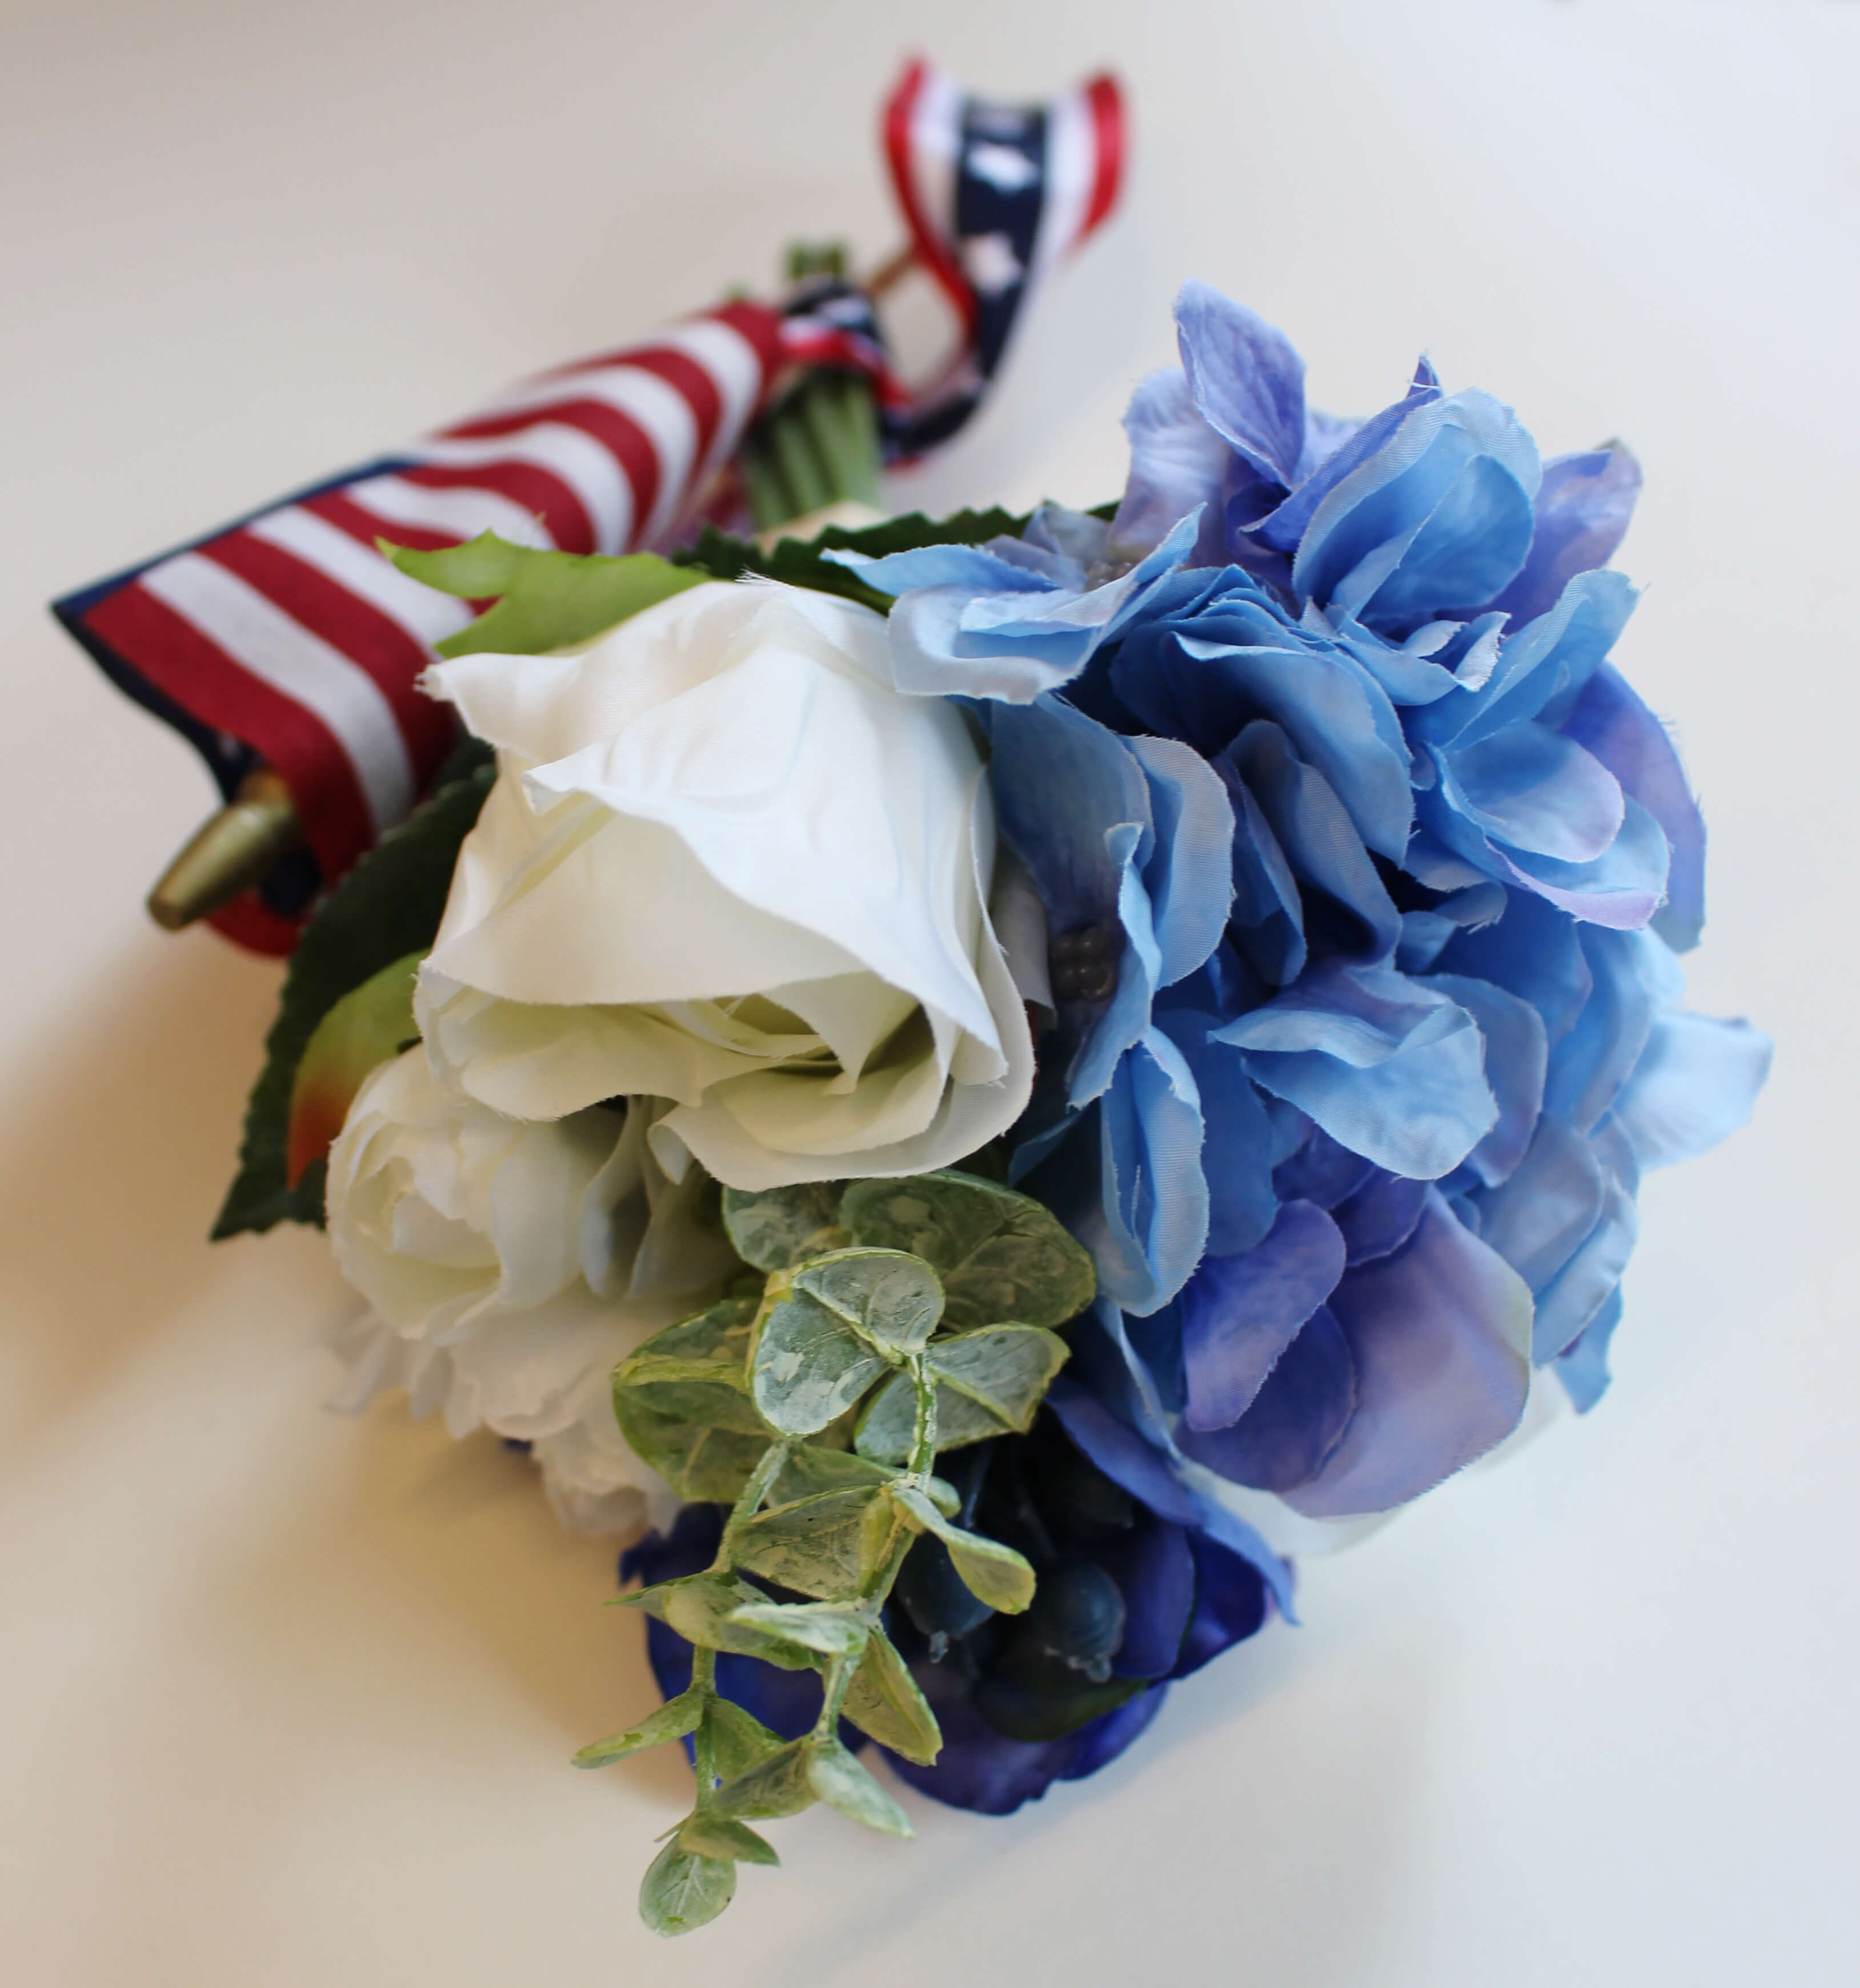 White and blue flowers in a bouquet with an American flag and ribbon